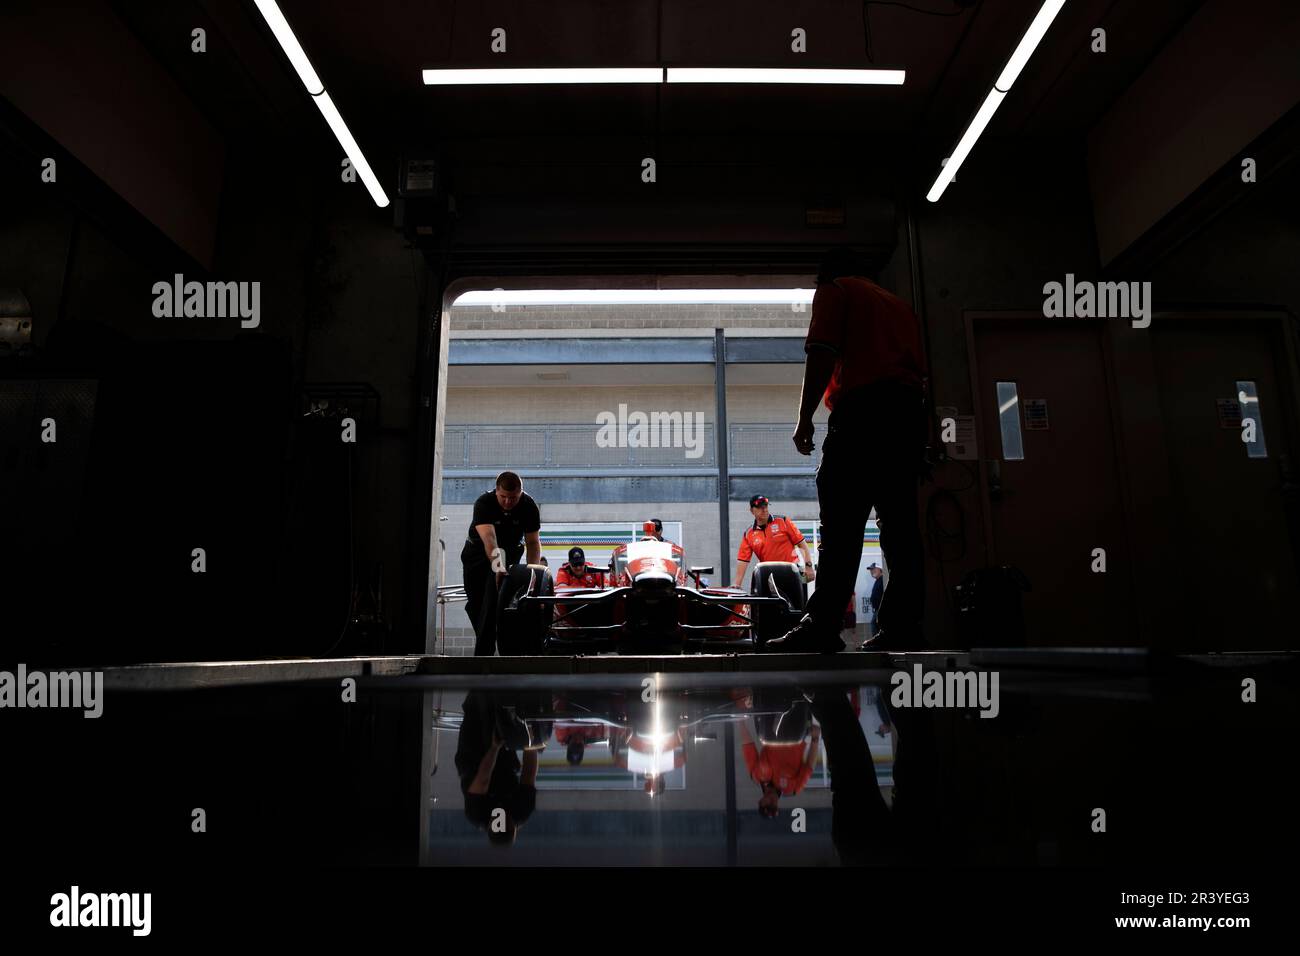 The crew of AJ Foyt racing work on the car following a practice session for the Indianapolis 500 at Indianapolis Motor Speedway in Speedway IN. Stock Photo